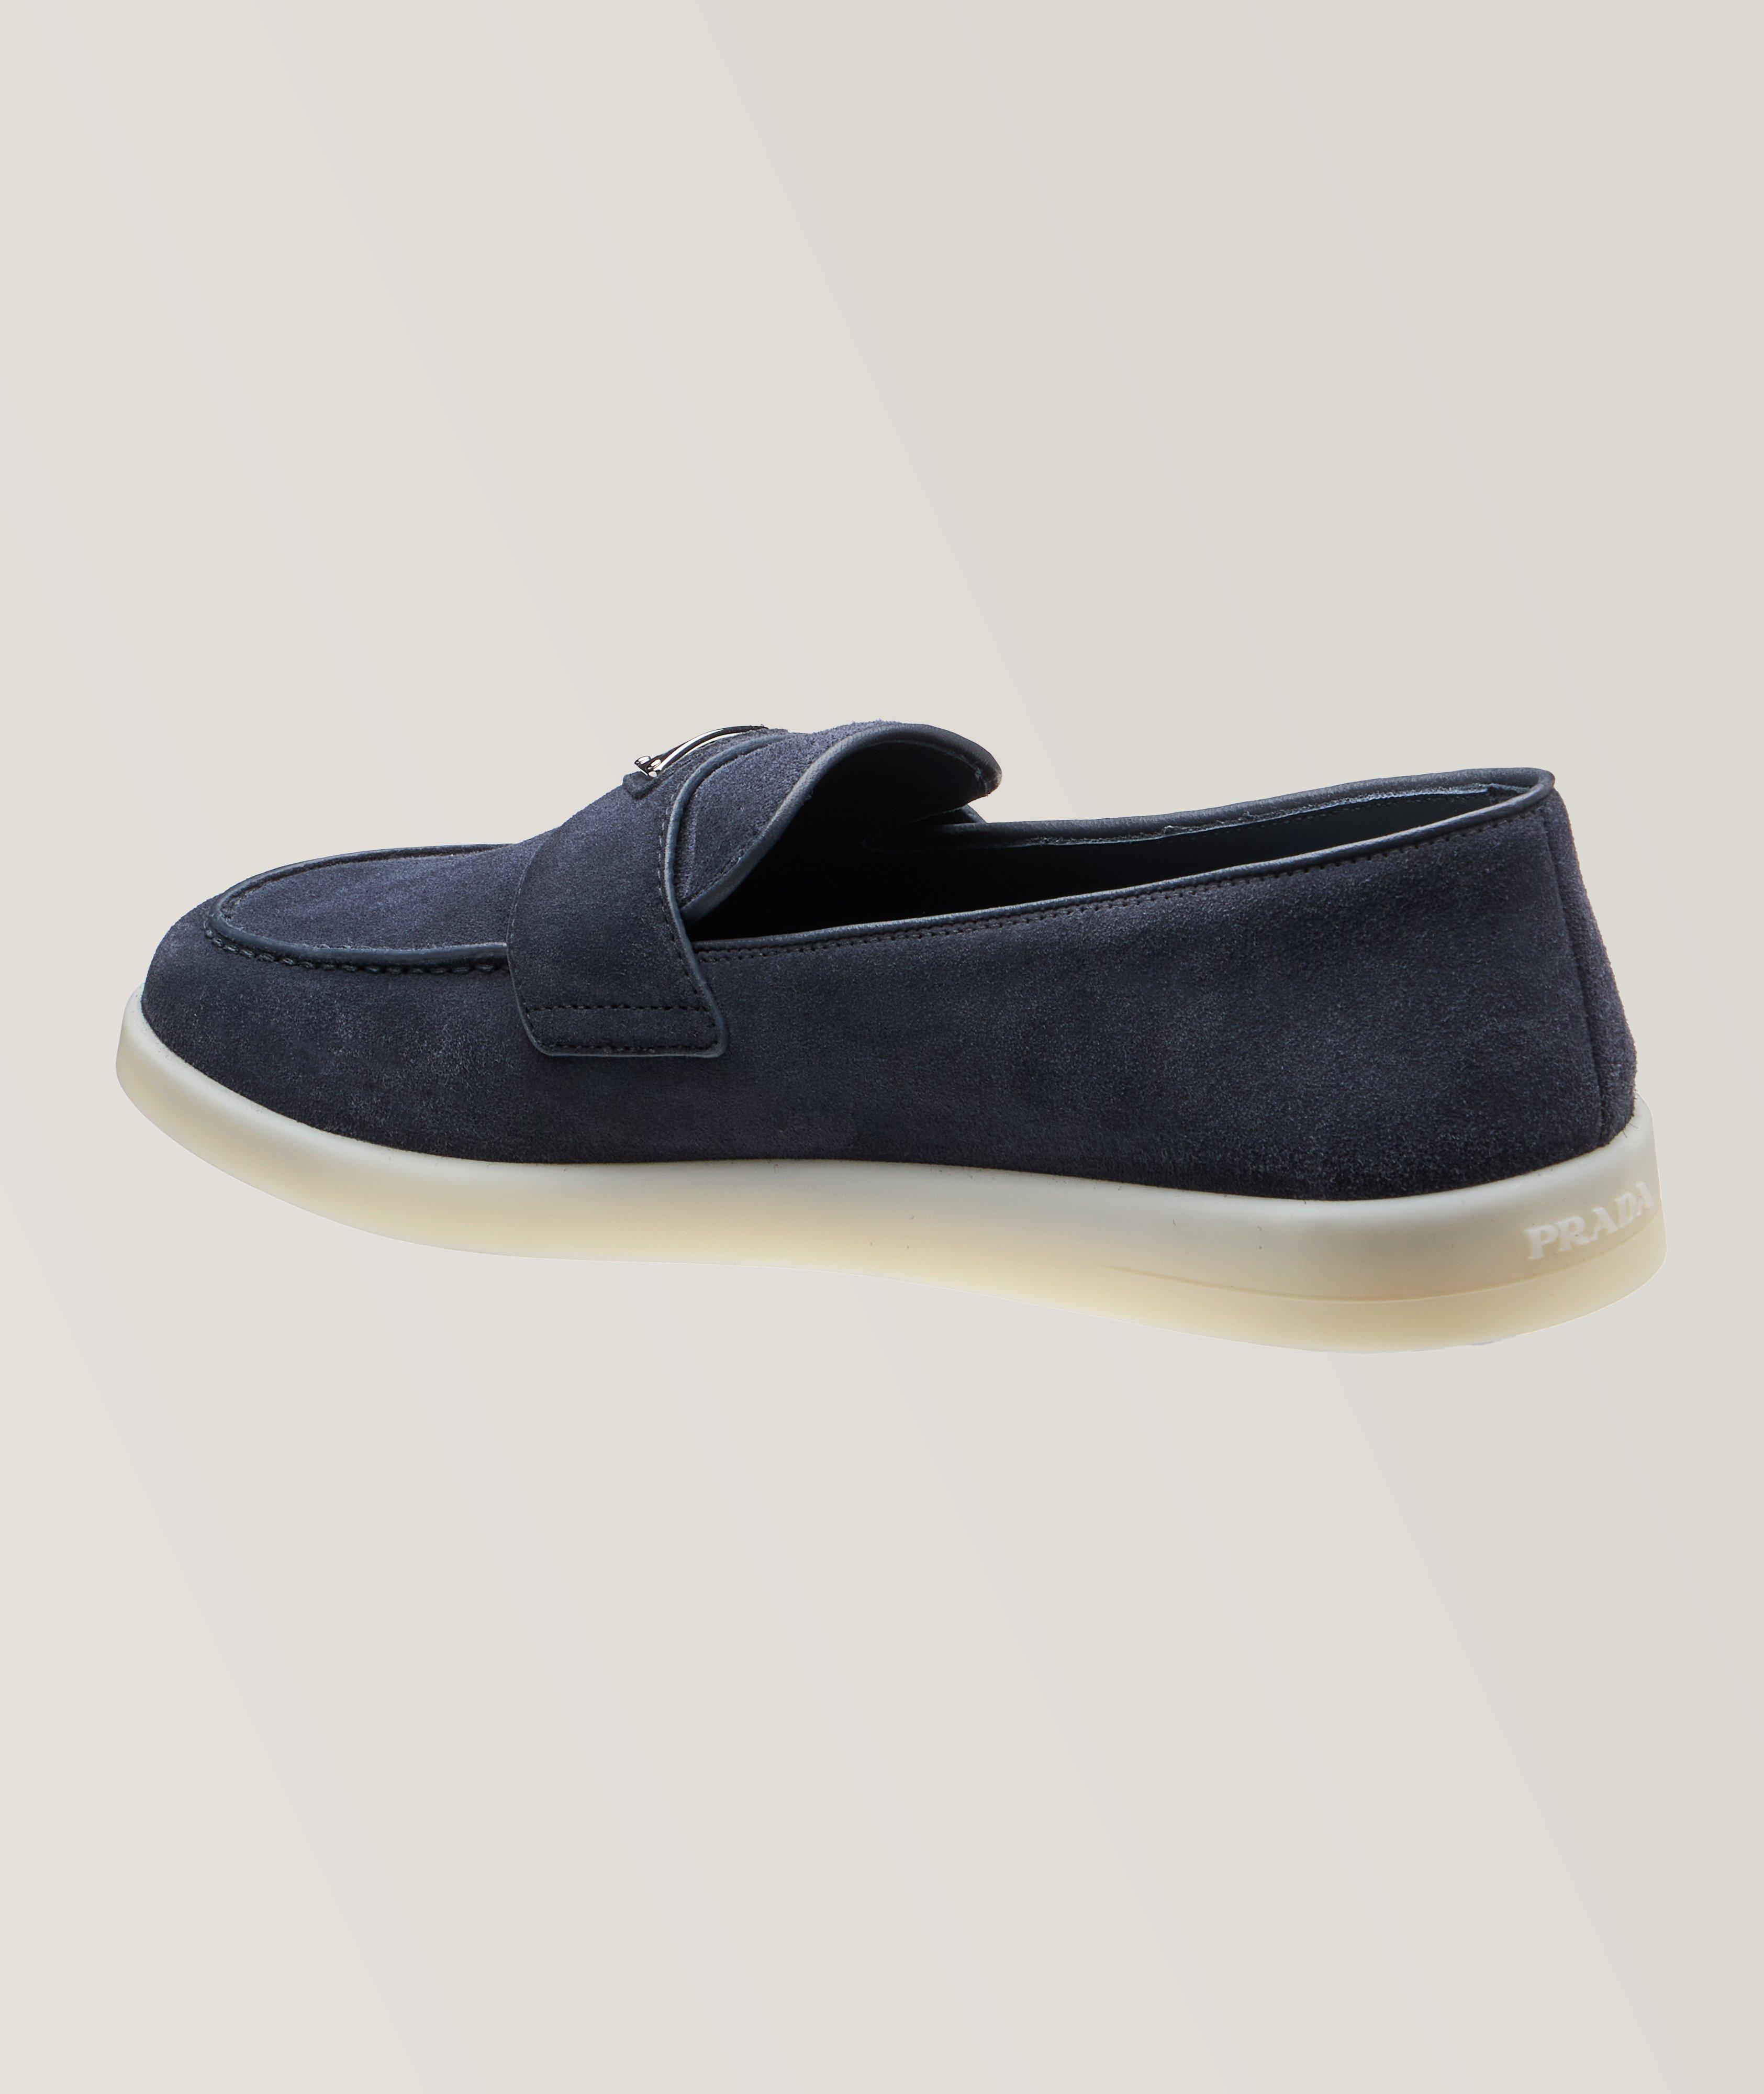 Saint Tropez Suede Leather Loafers image 1